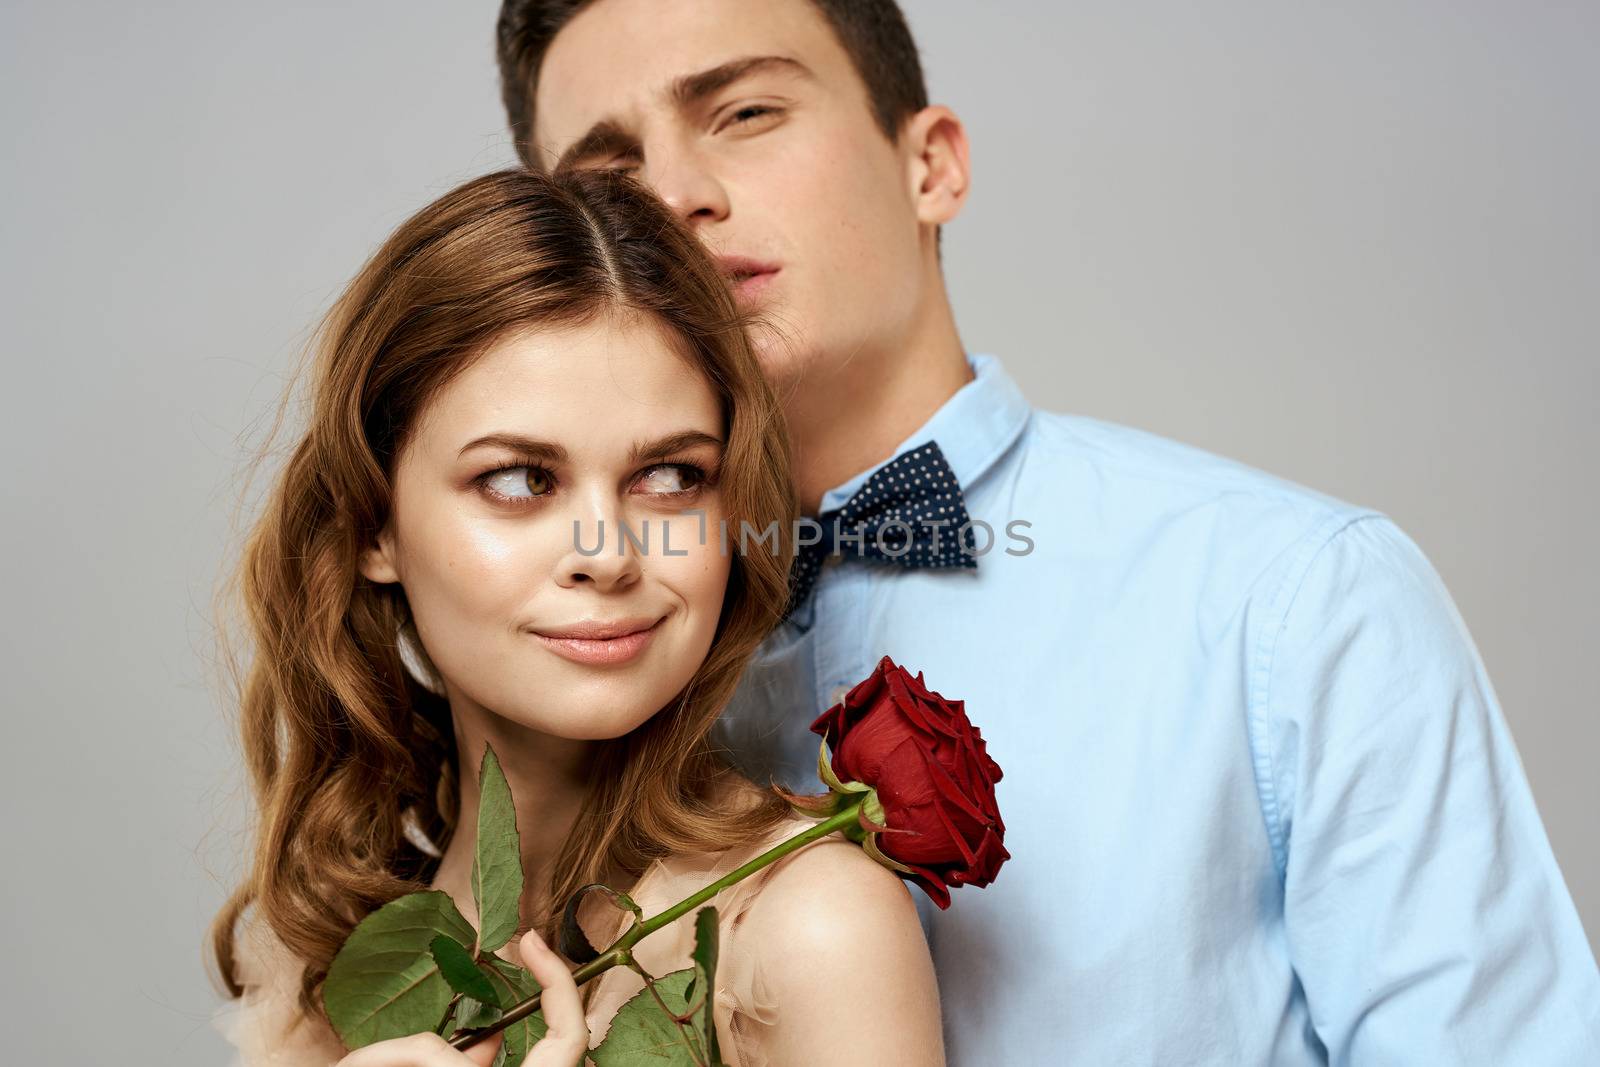 Young couple romance hug relationship dating red rose light studio background by SHOTPRIME